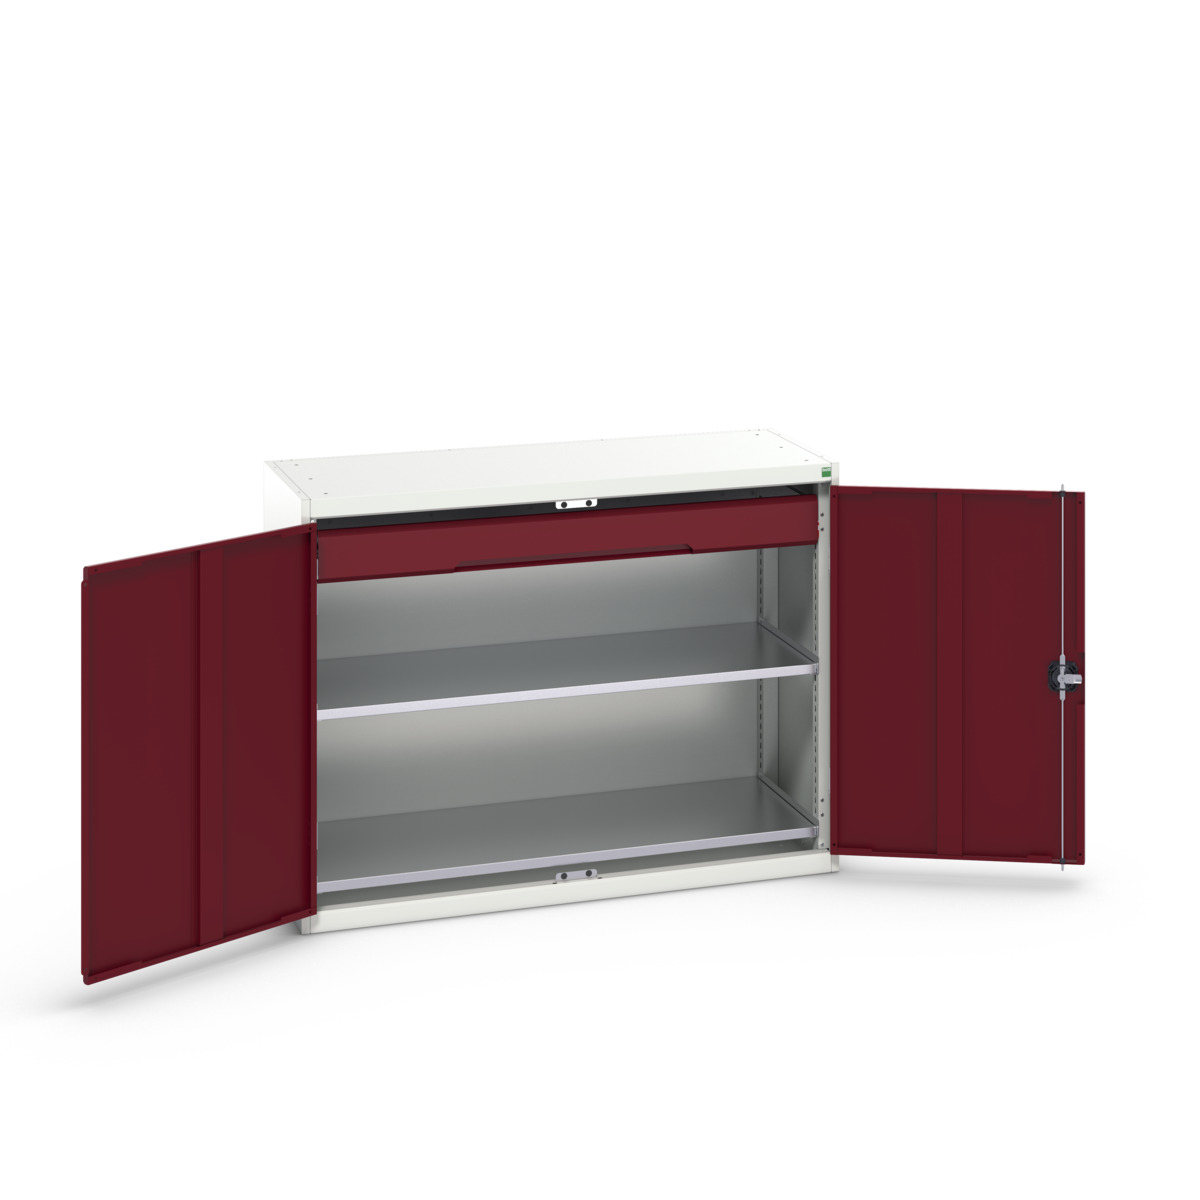 16926604.24 - verso kitted cupboard